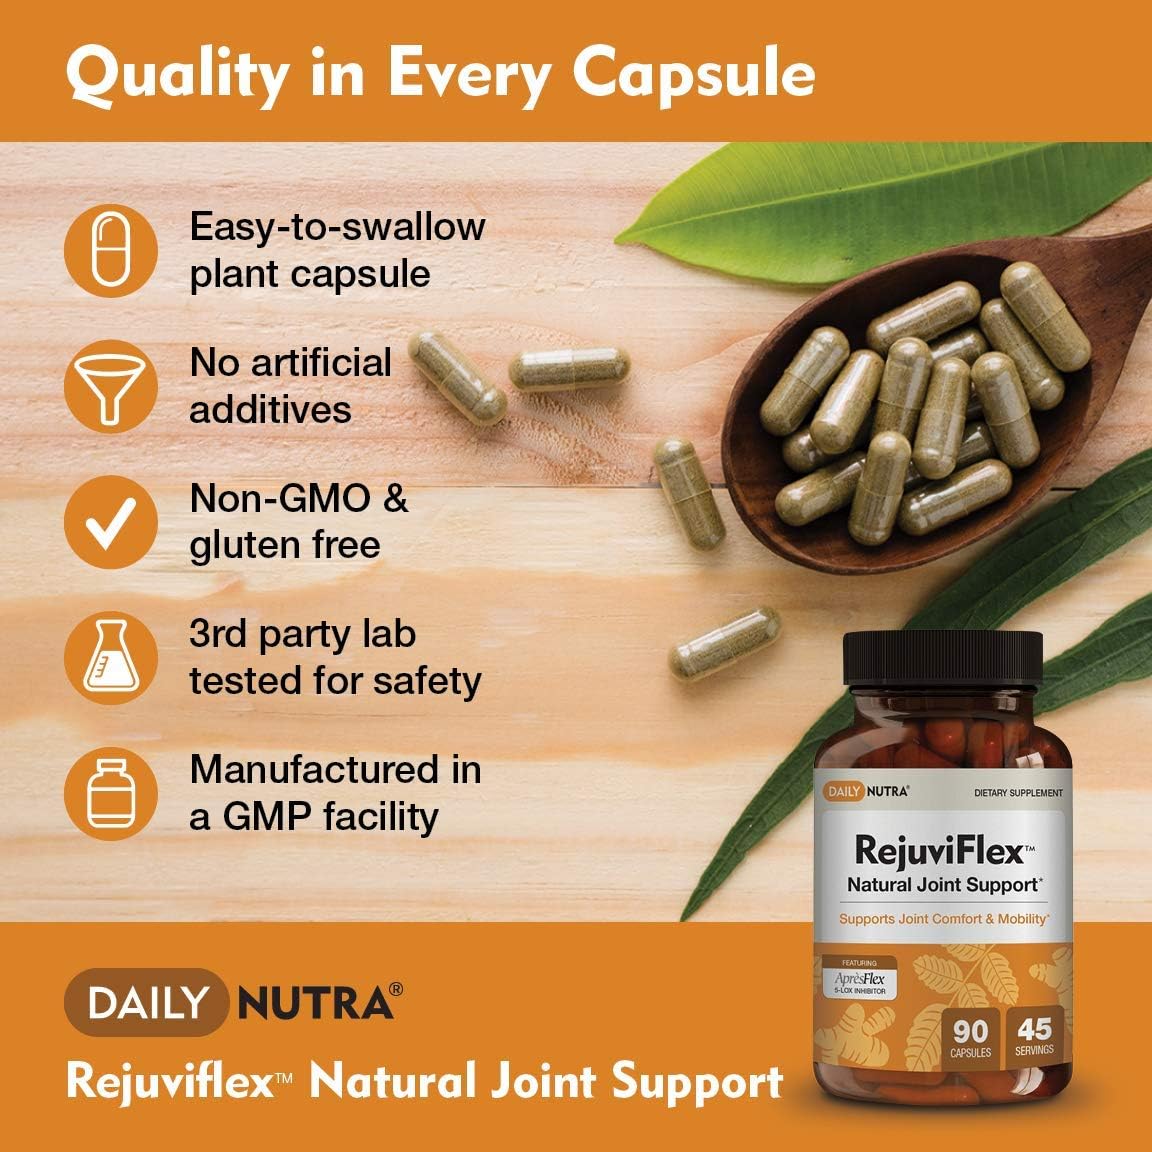 DailyNutra RejuviFlex - Natural Joint Supplement w/ApresFlex Boswellia AKBA, Turmeric Curcumin, Piperine & White Willow Bark - for Function of Hands, Knees, Overall Joint Health (90 Capsules) : Health & Household